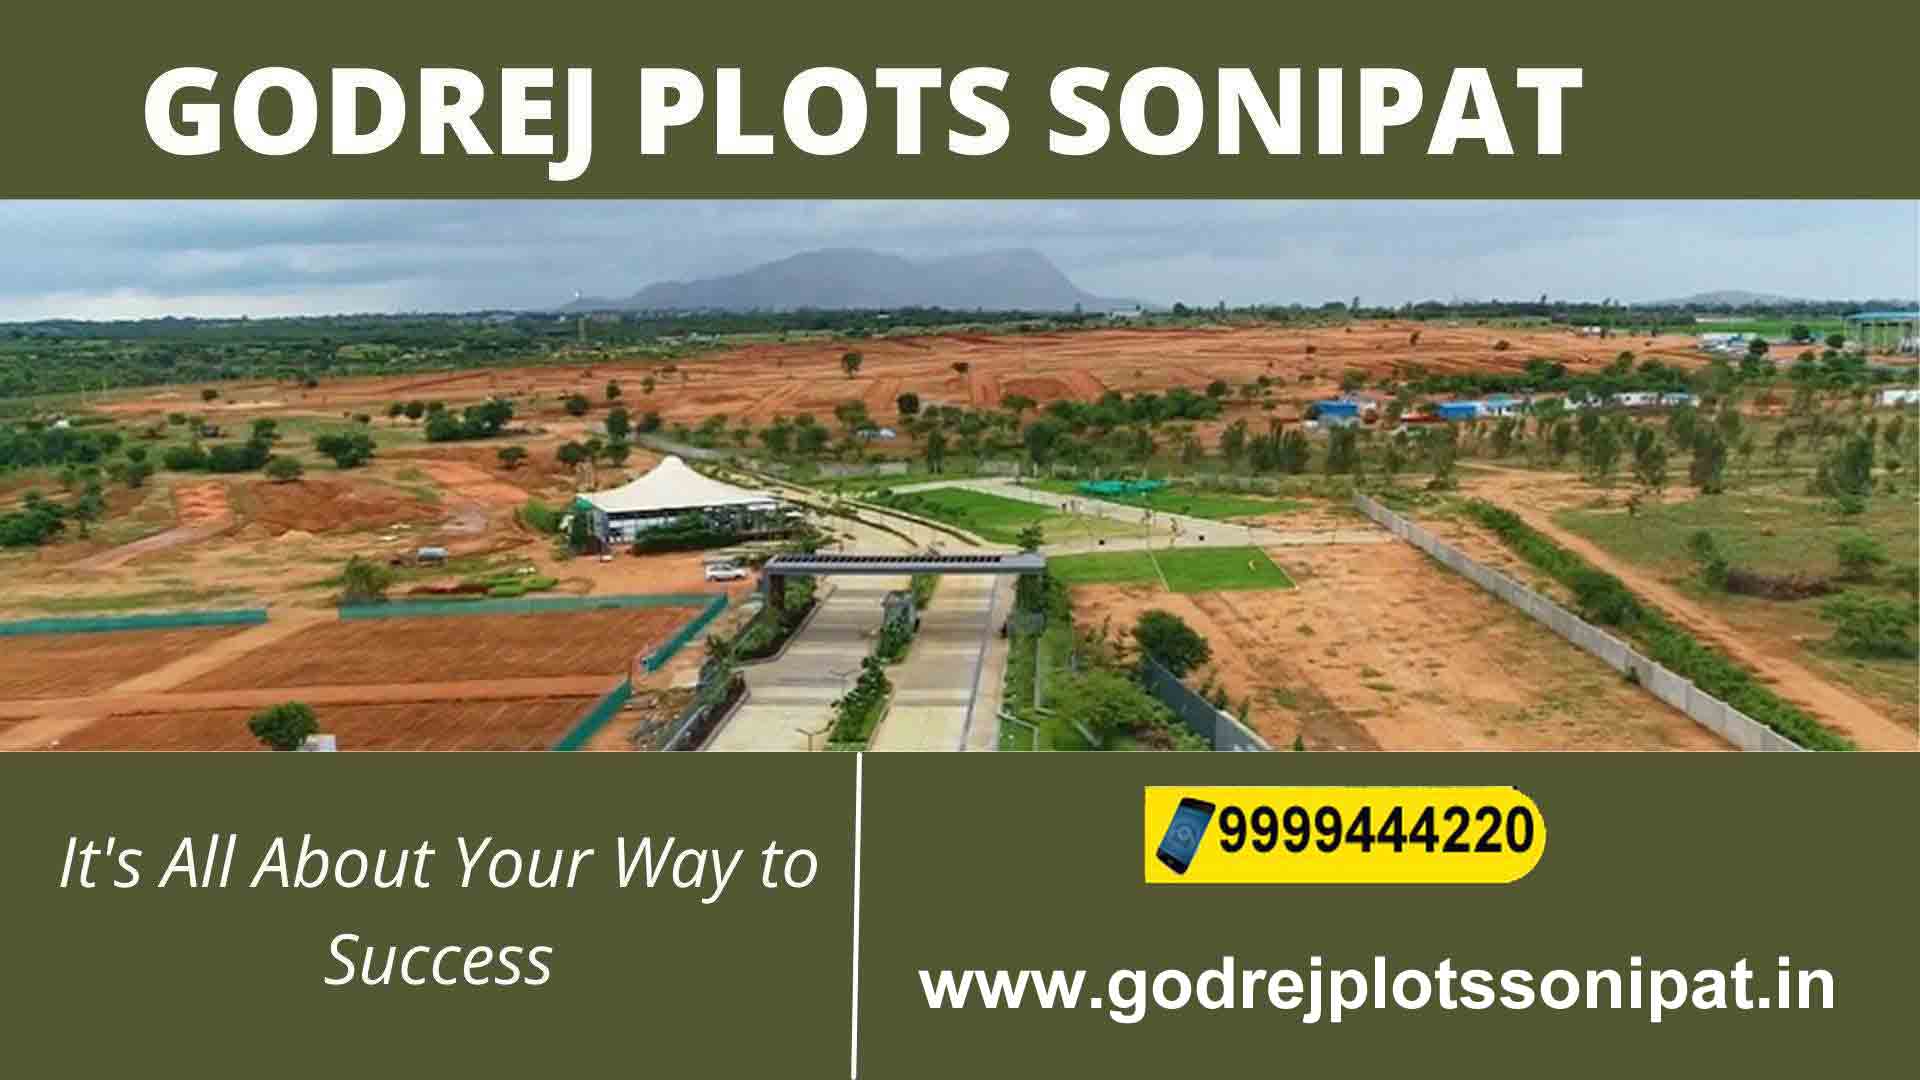 Book Now Godrej Plots Sonipat that gives peace out of urban Jungle